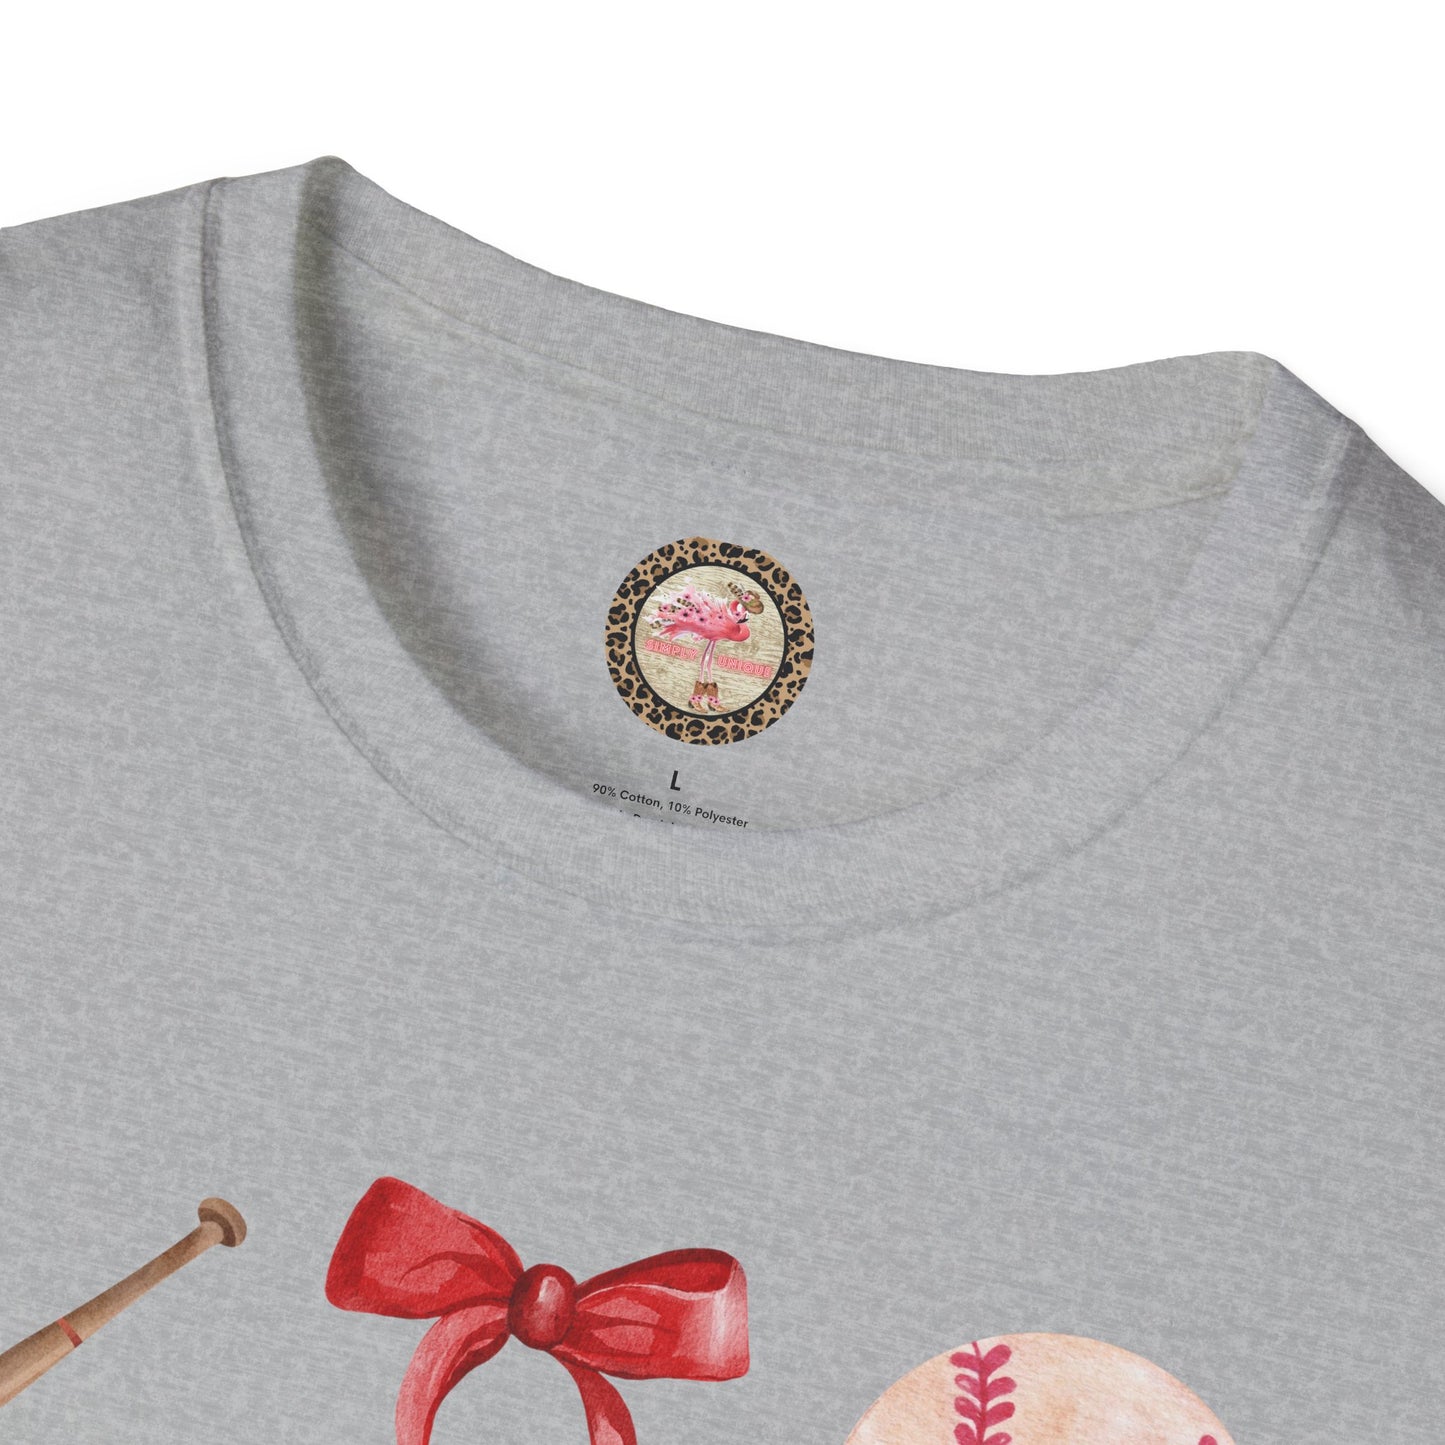 Baseball and bows design- great for Moms!!